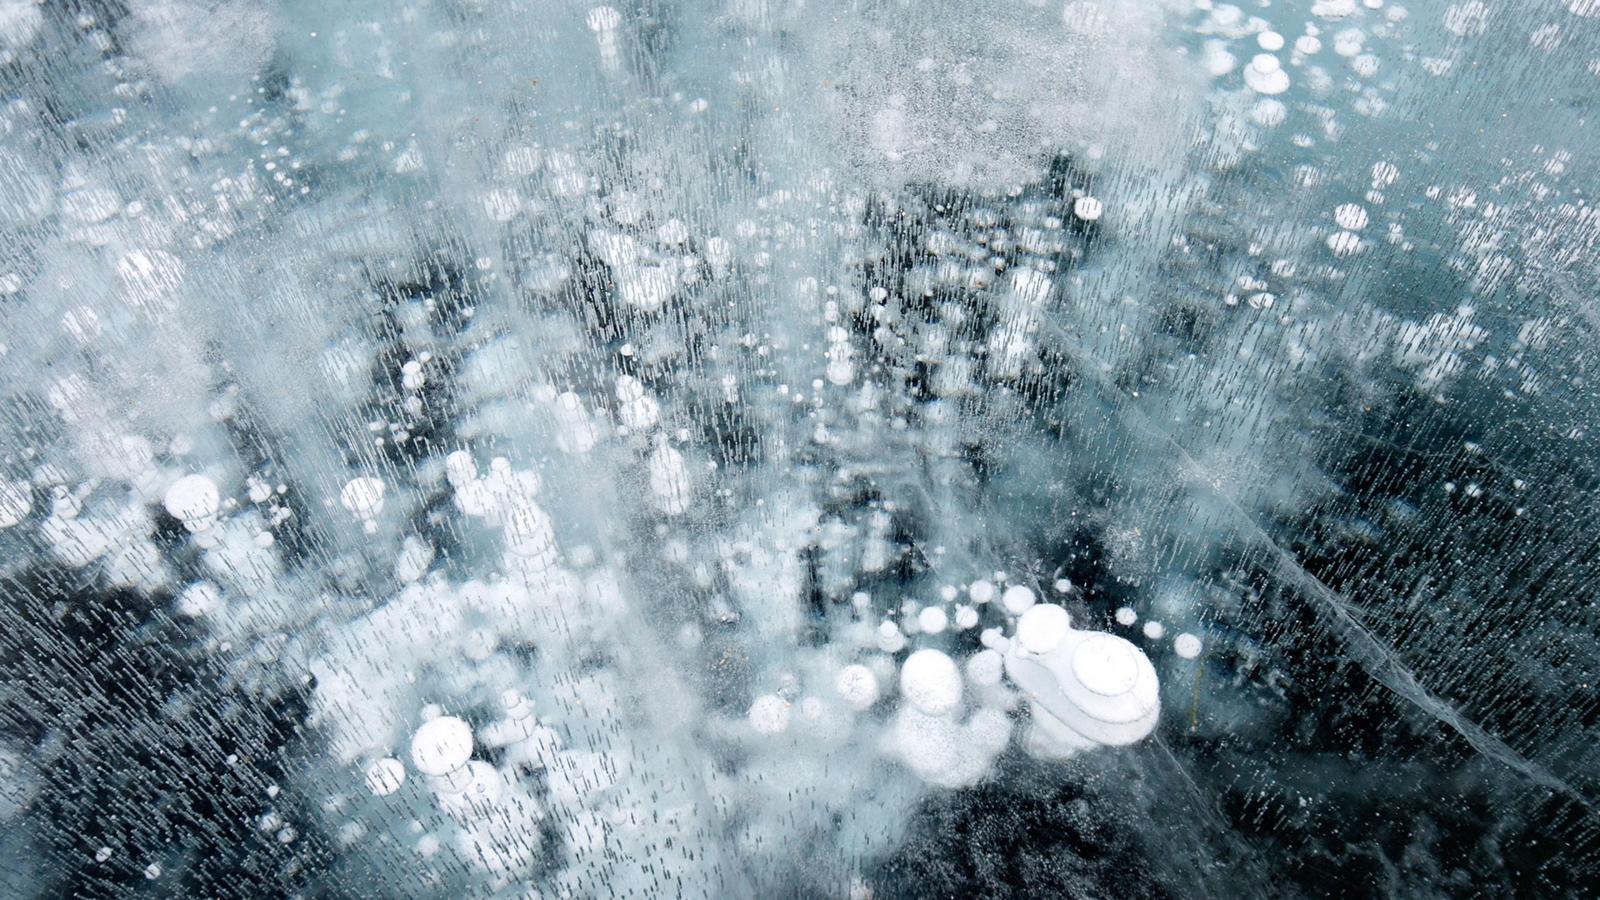  Flammable ice can be fragile, and if it crumbles during drilling, it could release a 'methane burp' into the ocean. Some fear that this may unleash a tsunami (Credit: Alarmy)